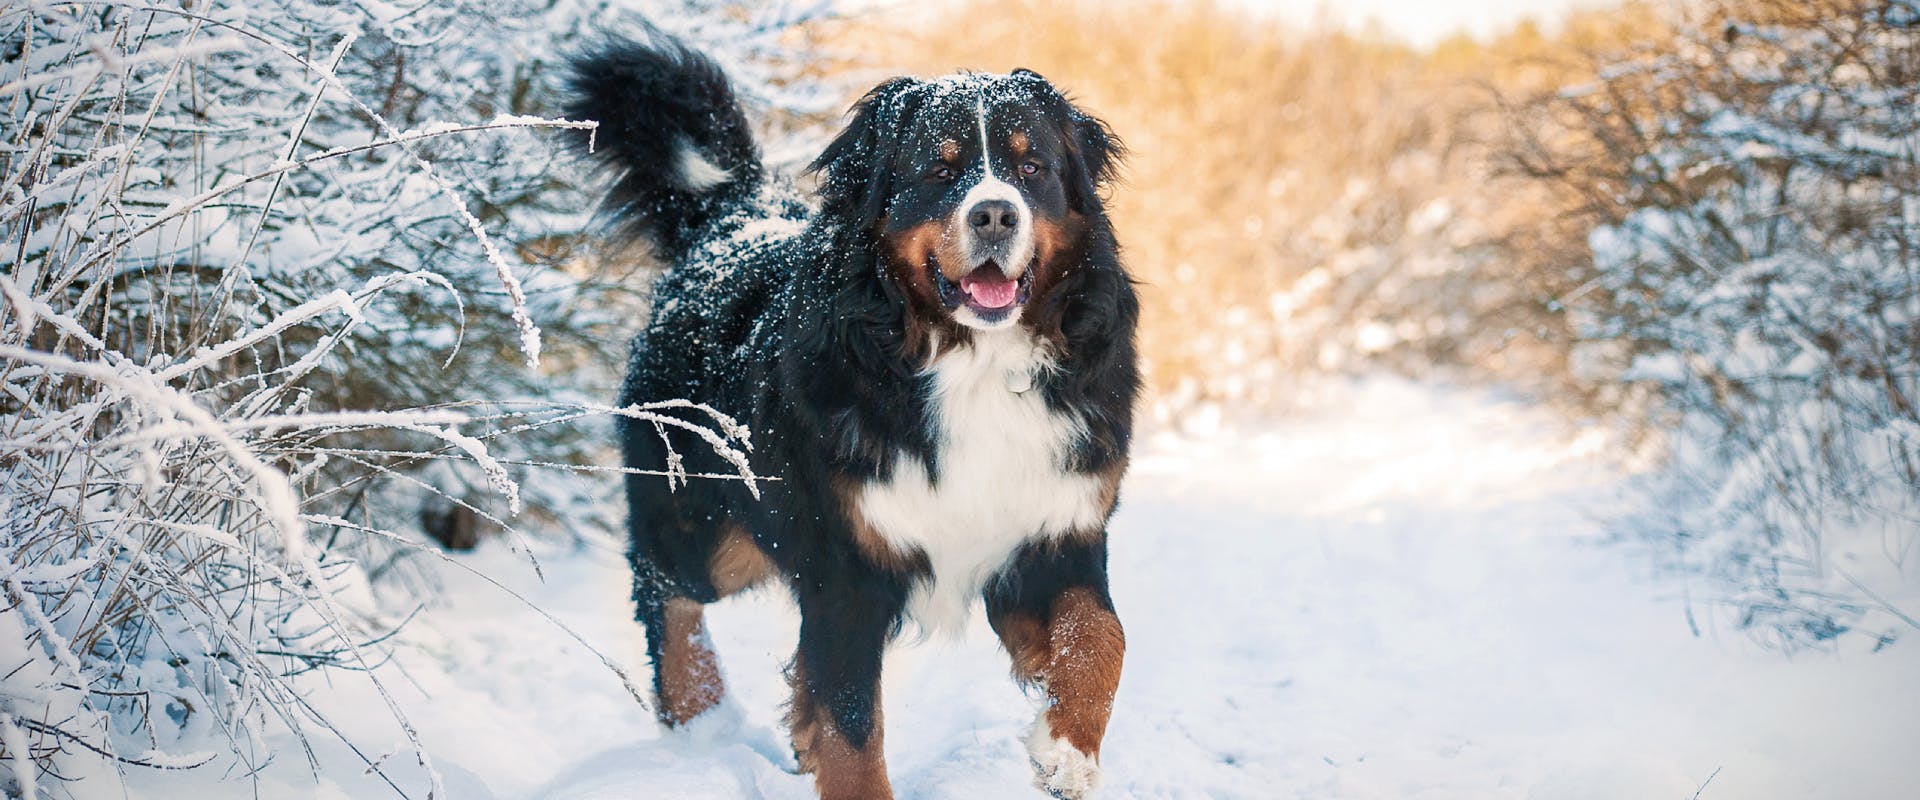 a Bernese mountain dog walking through a snowy path with frozen bushes on either side